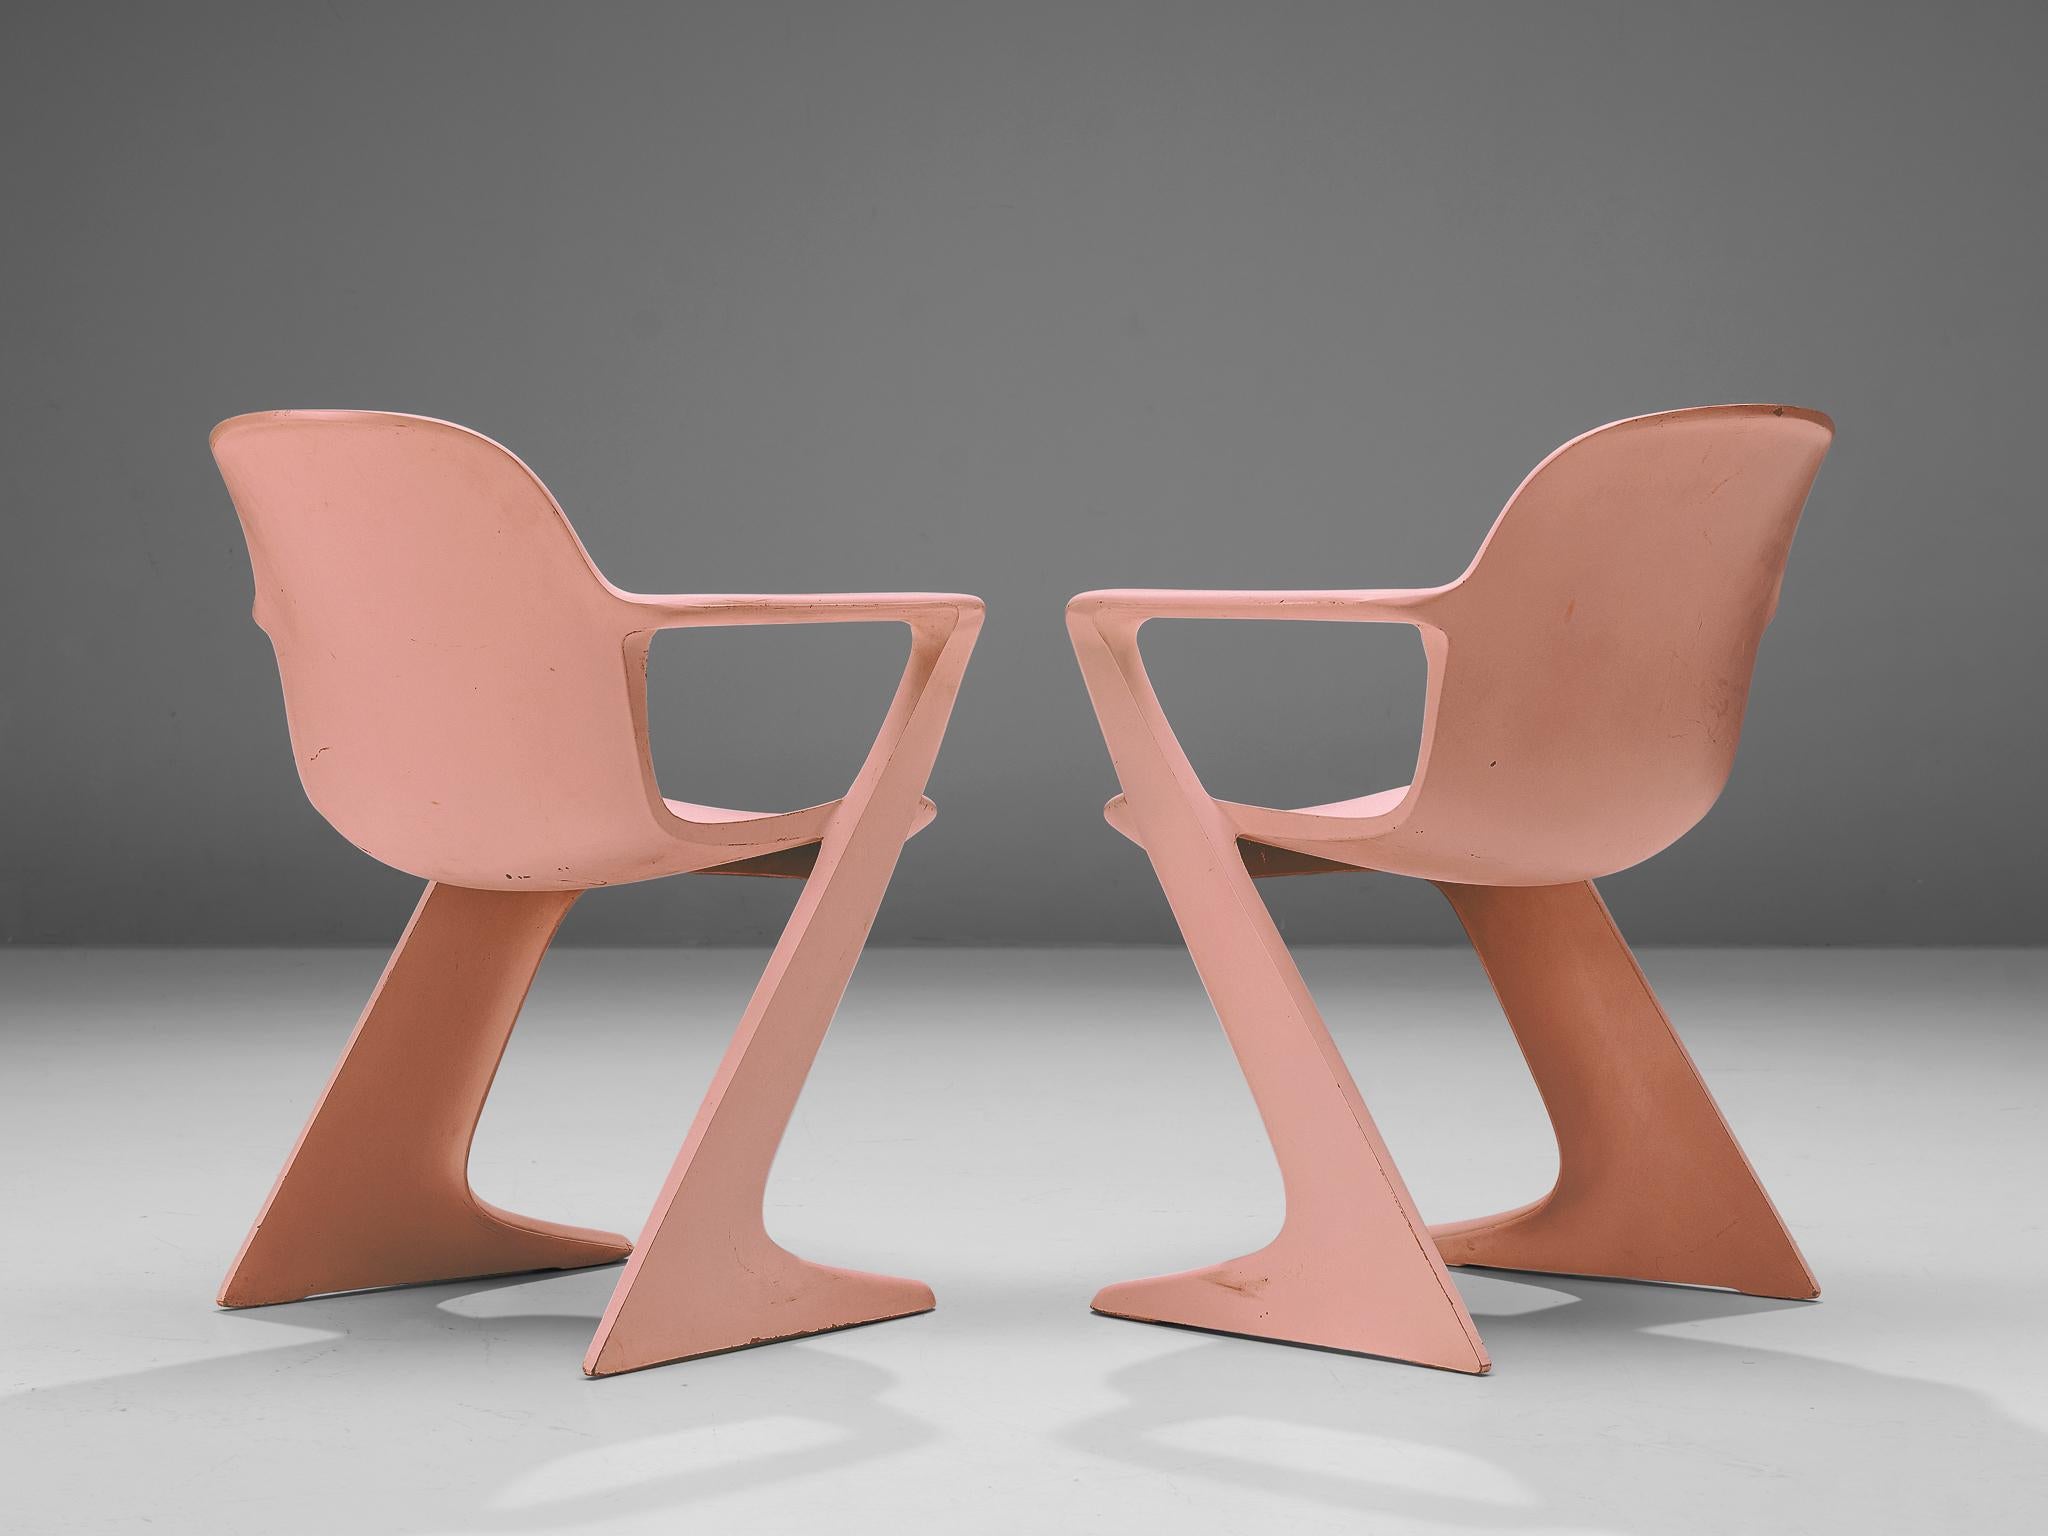 Fiberglass Ernst Moeckl 'Kangaroo' Dining Chairs in Soft Pink For Sale